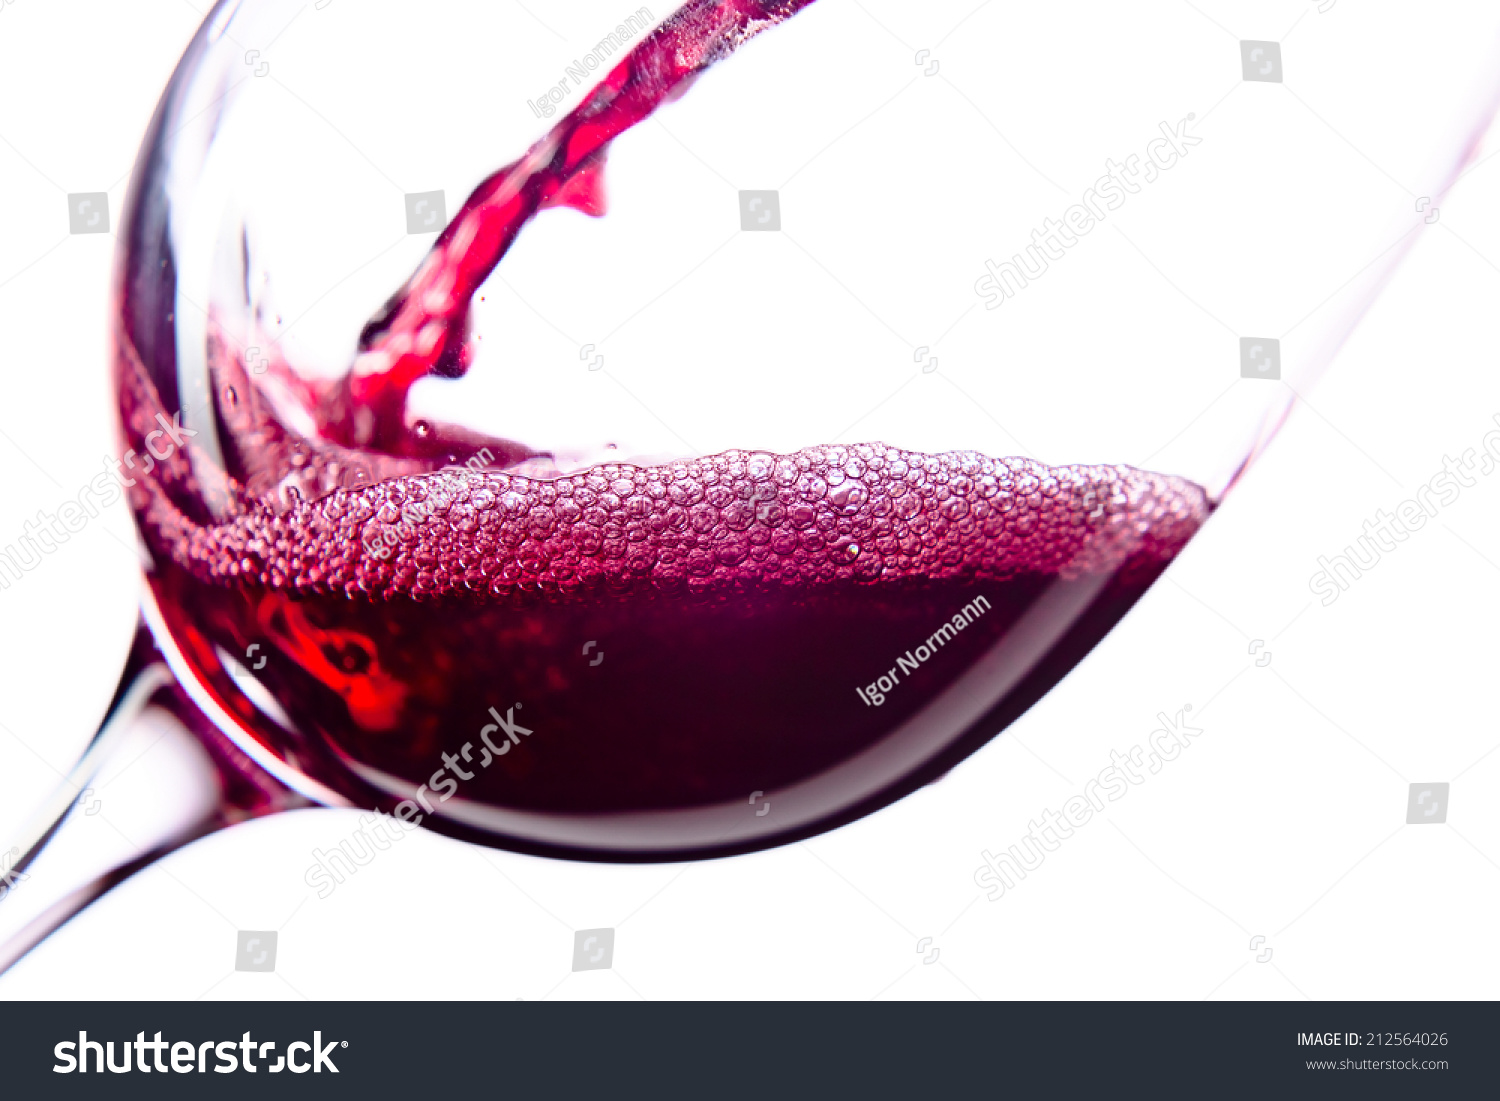  Red wine in wineglass on white background #212564026